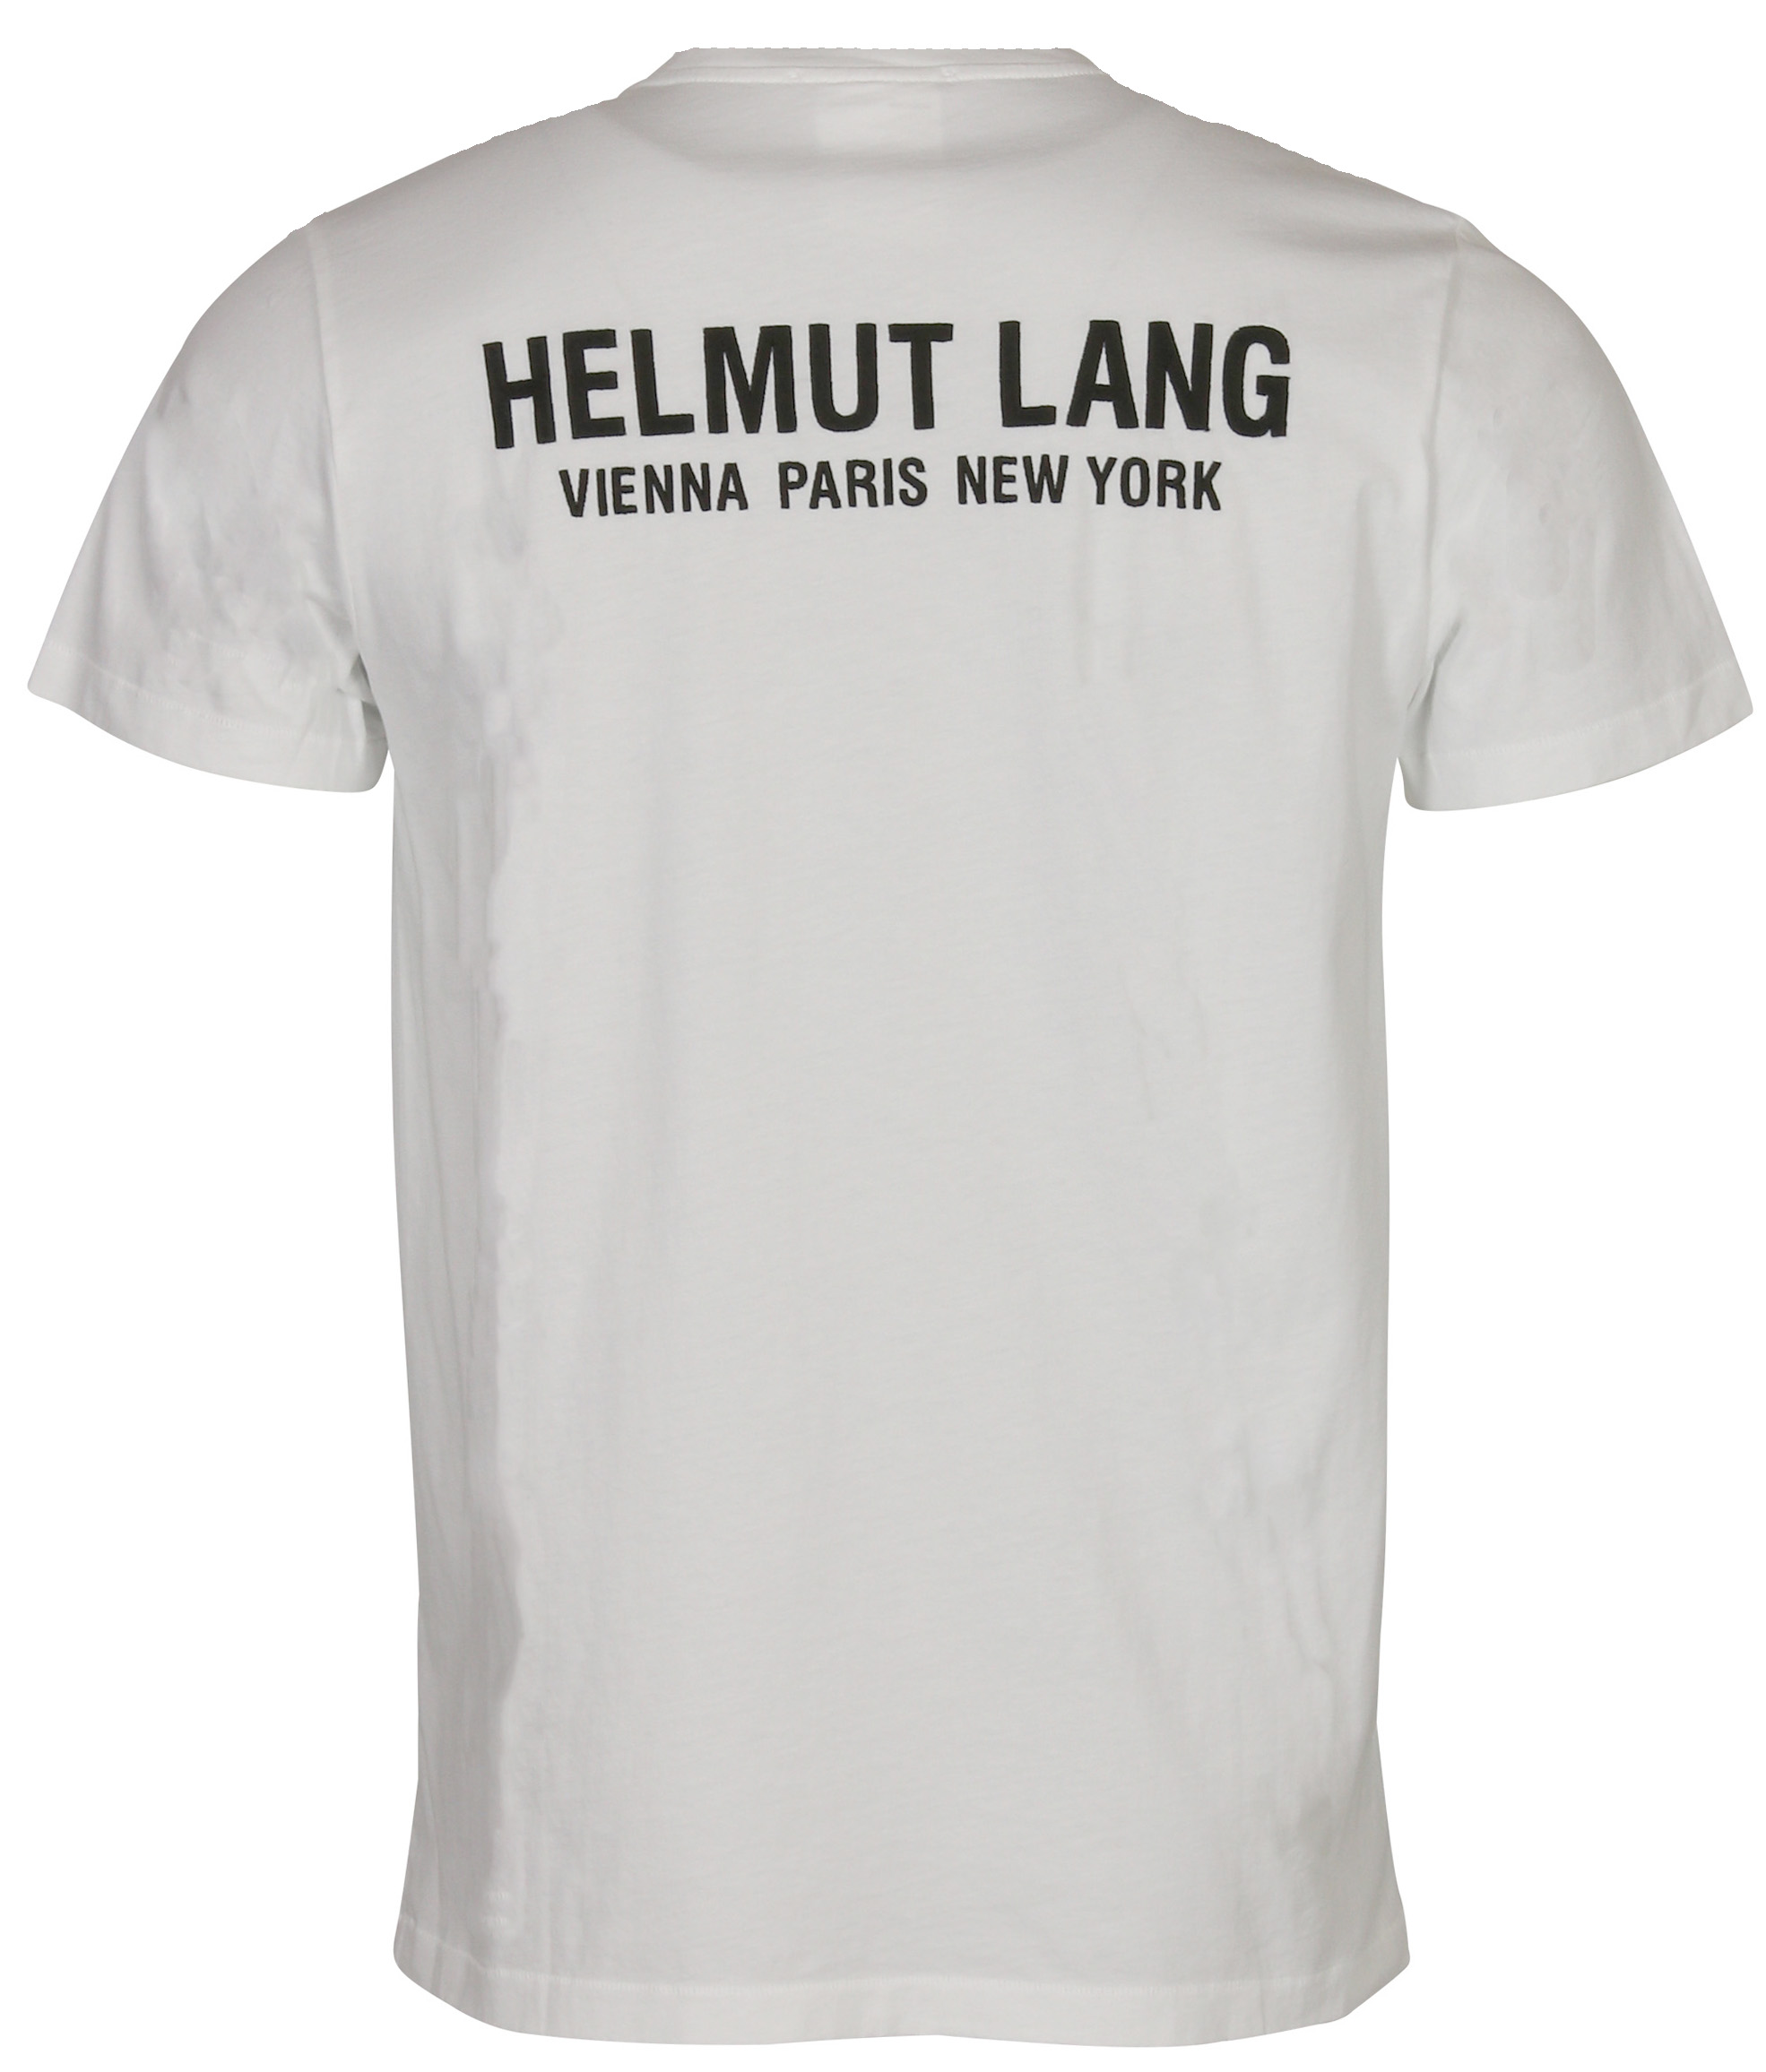 Helmut Lang T-Shirt White Printed Embroidered